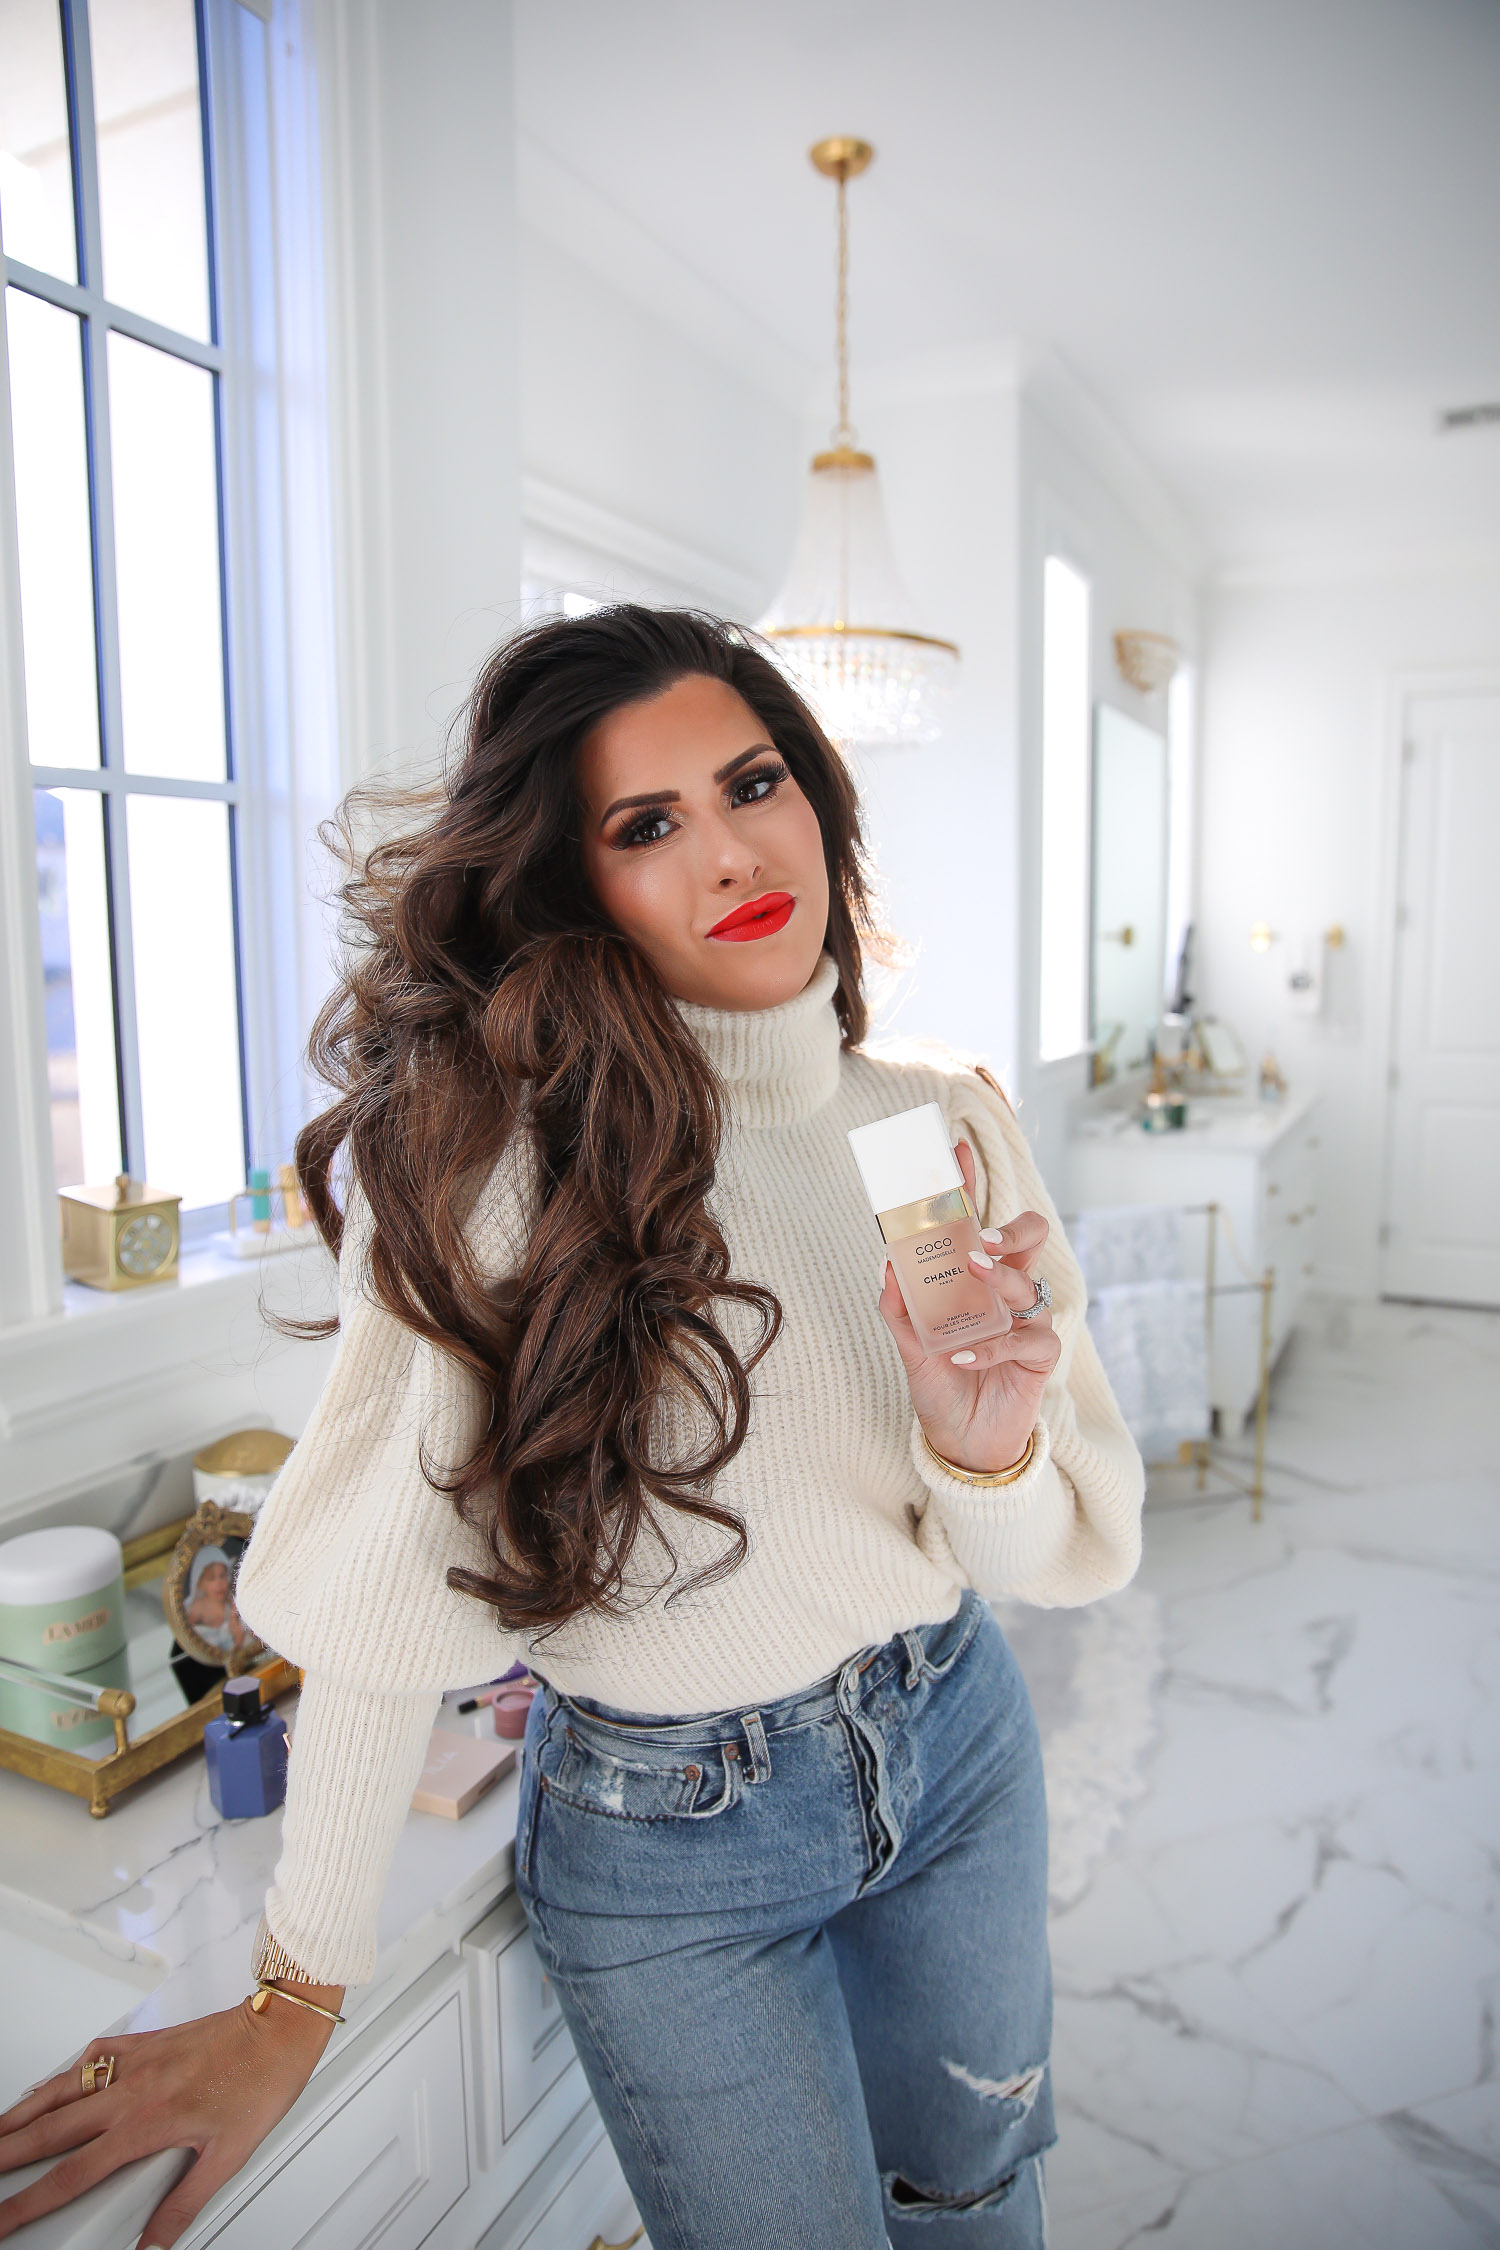 Chanel mademoiselle hair perfume review, Emily Gemma, beauty blogger |Sephora Favorites by popular US beauty blog, The Sweetest Thing: image of a woman wearing a cream turtleneck sweater, distressed denim and standing next to her bathroom vanity while holding Coco Chanel perfume. 